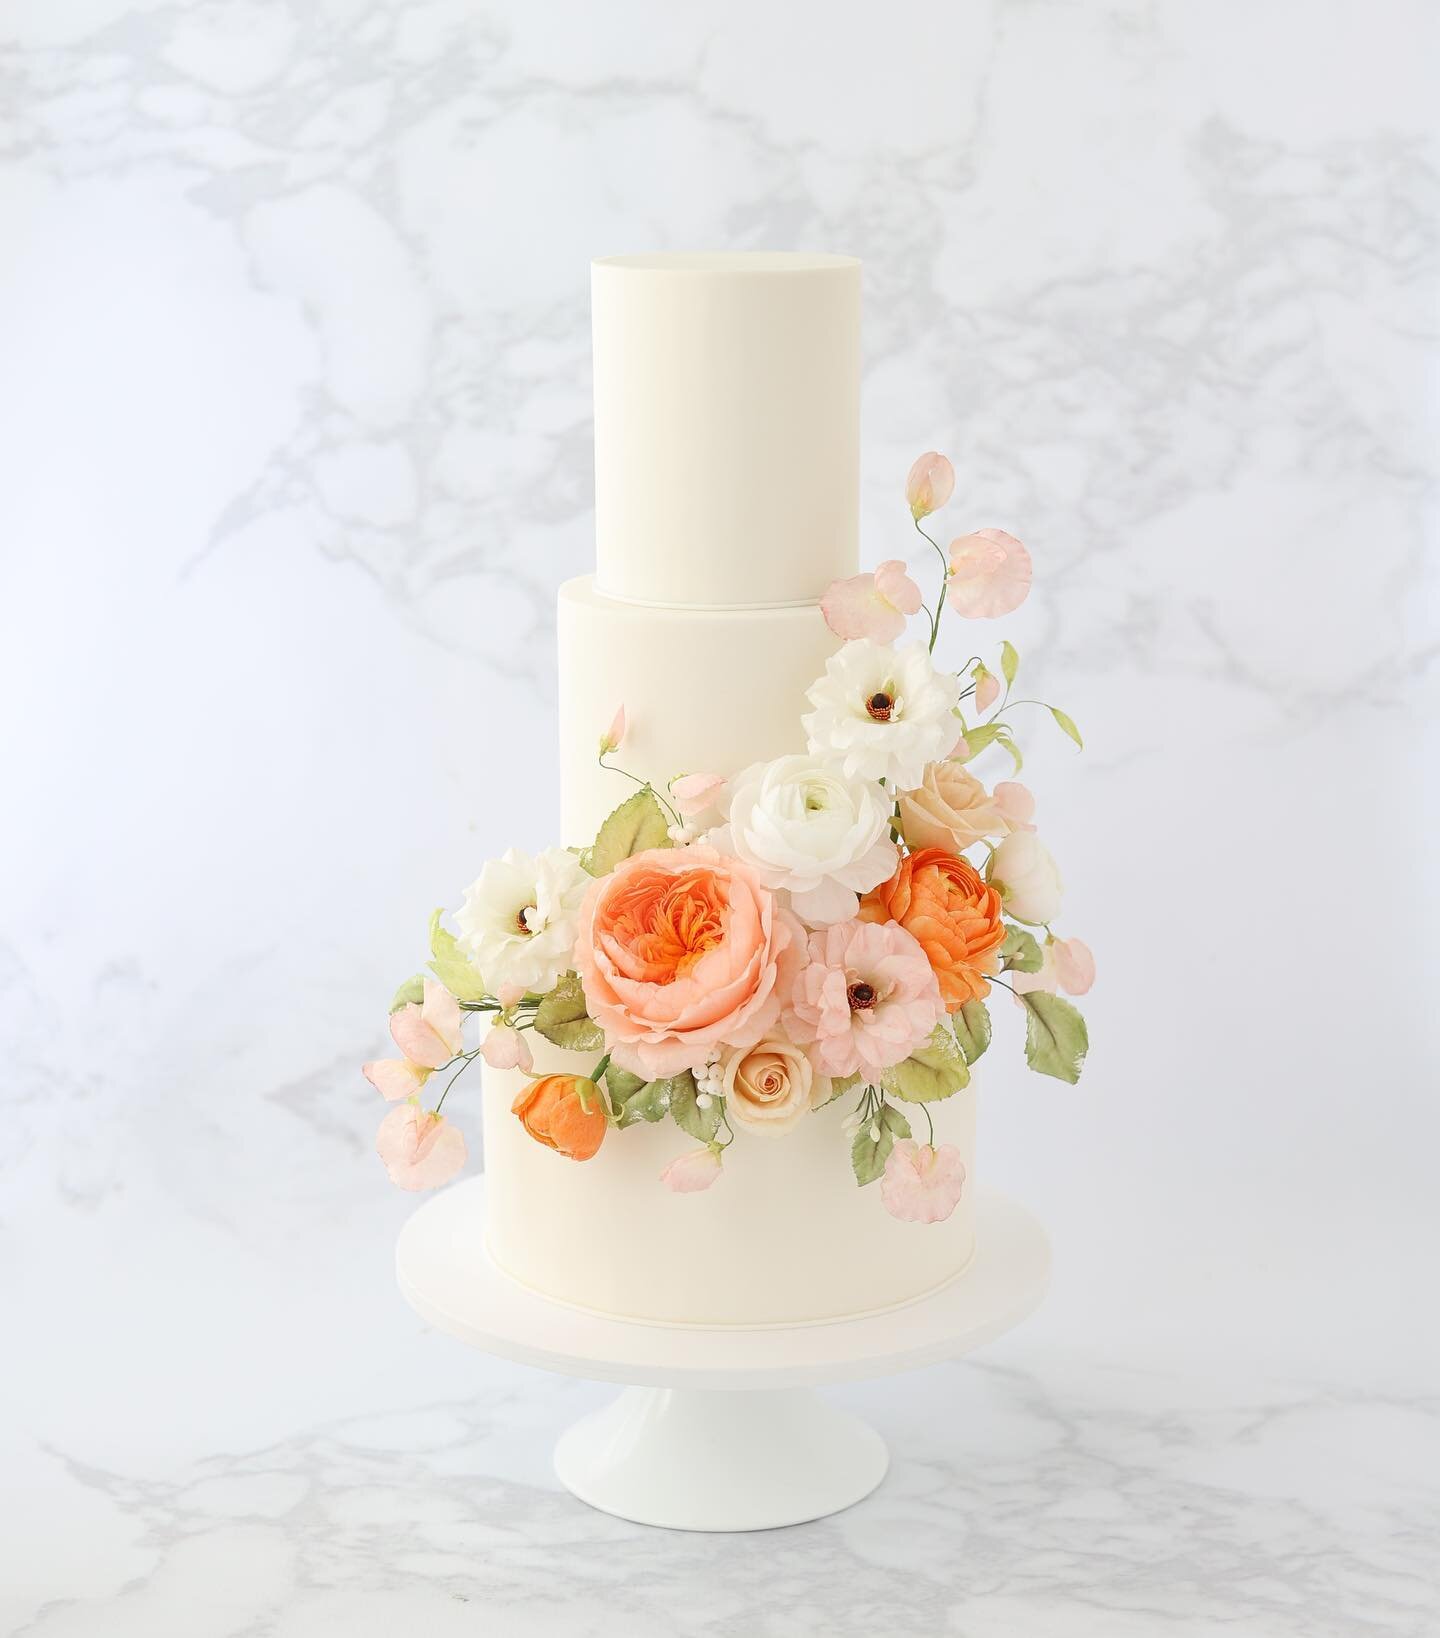 Specially made for V+K using their wedding floral colors during their ceremony in NY. The lovely couple flew back from NY to HK to celebrate their wedding with a small intimate dinner. .
.
.
.
.
.
.
.
.
.
.
#cake #cakes #birthdaycakes #birthdaycake #